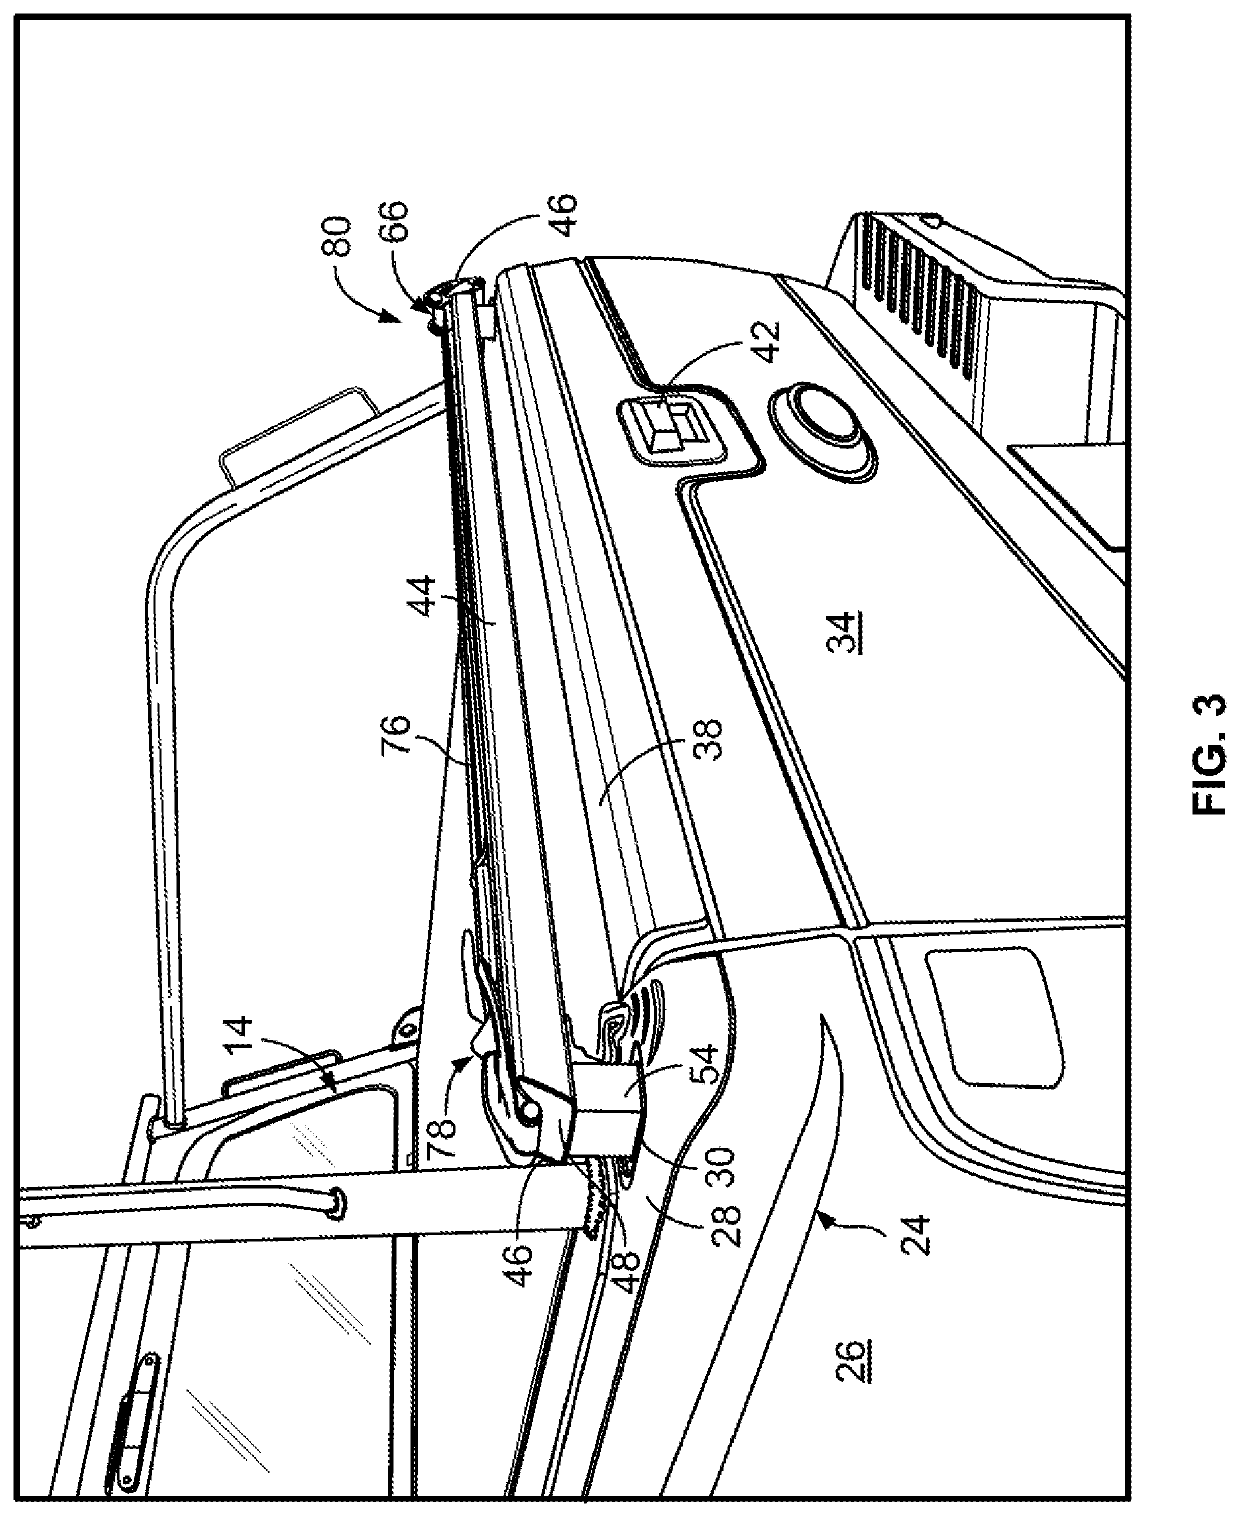 Tailgate saver system and method